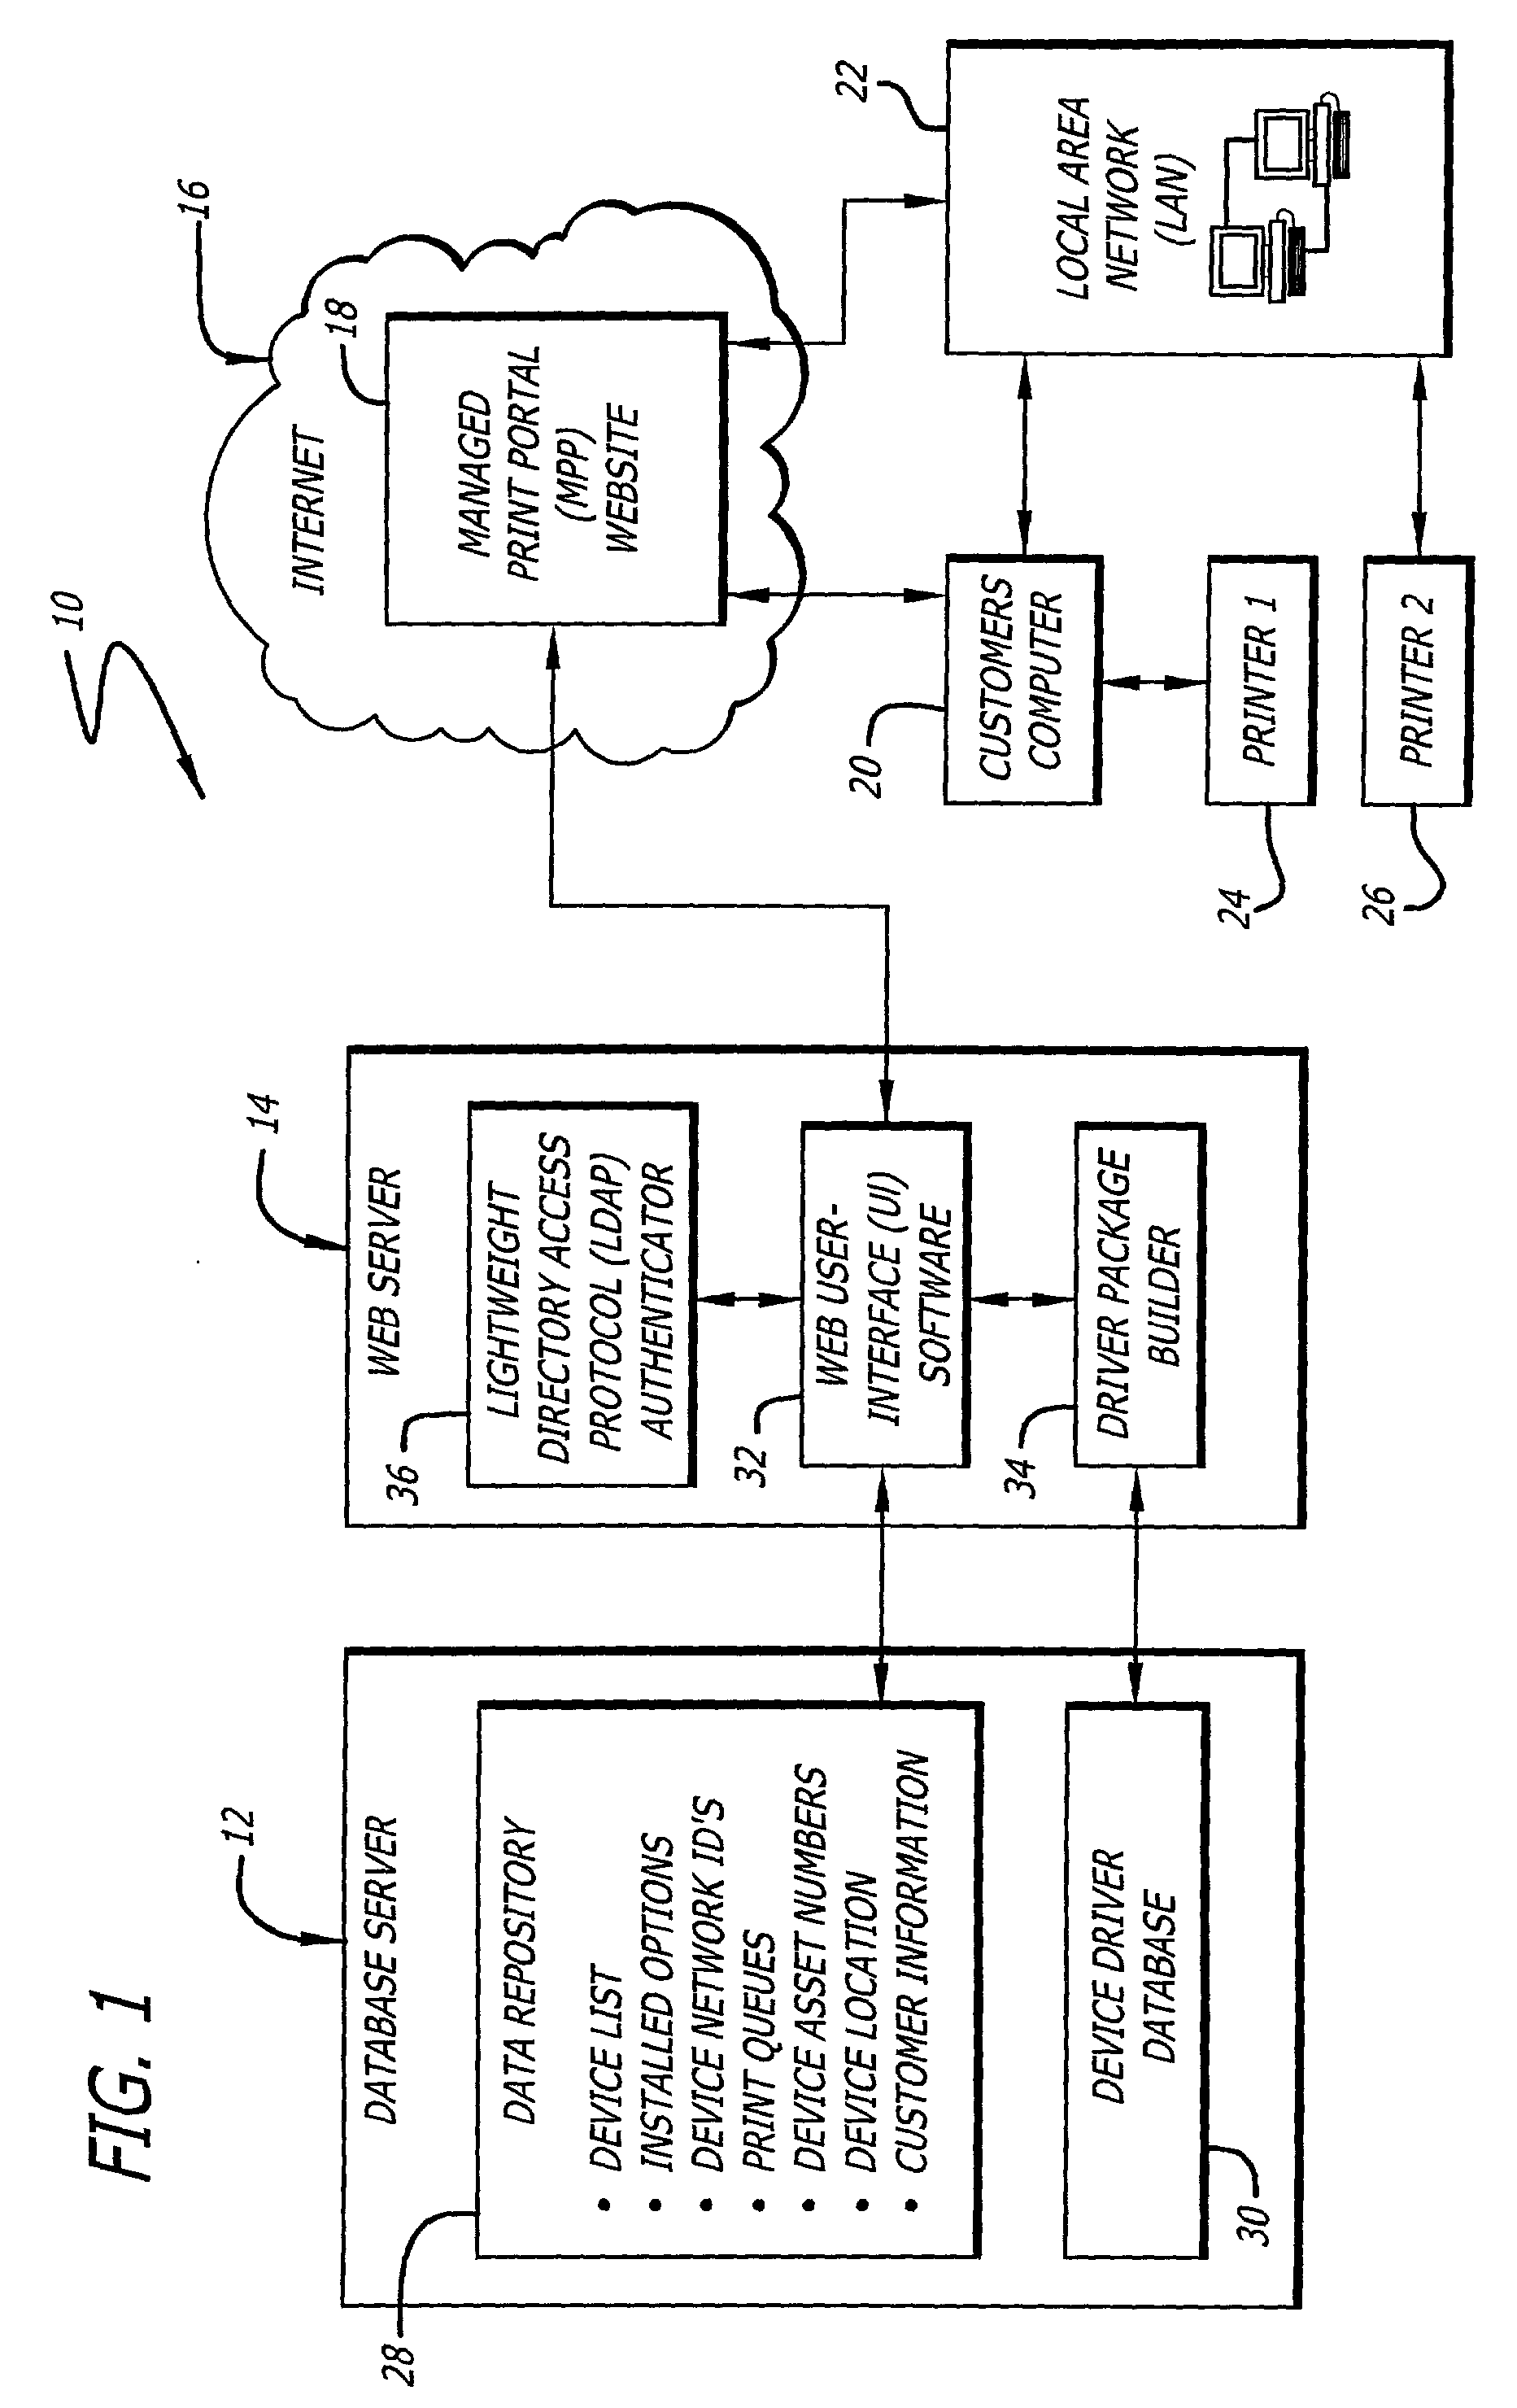 System and method for efficiently installing and configuring device drivers in managed environments